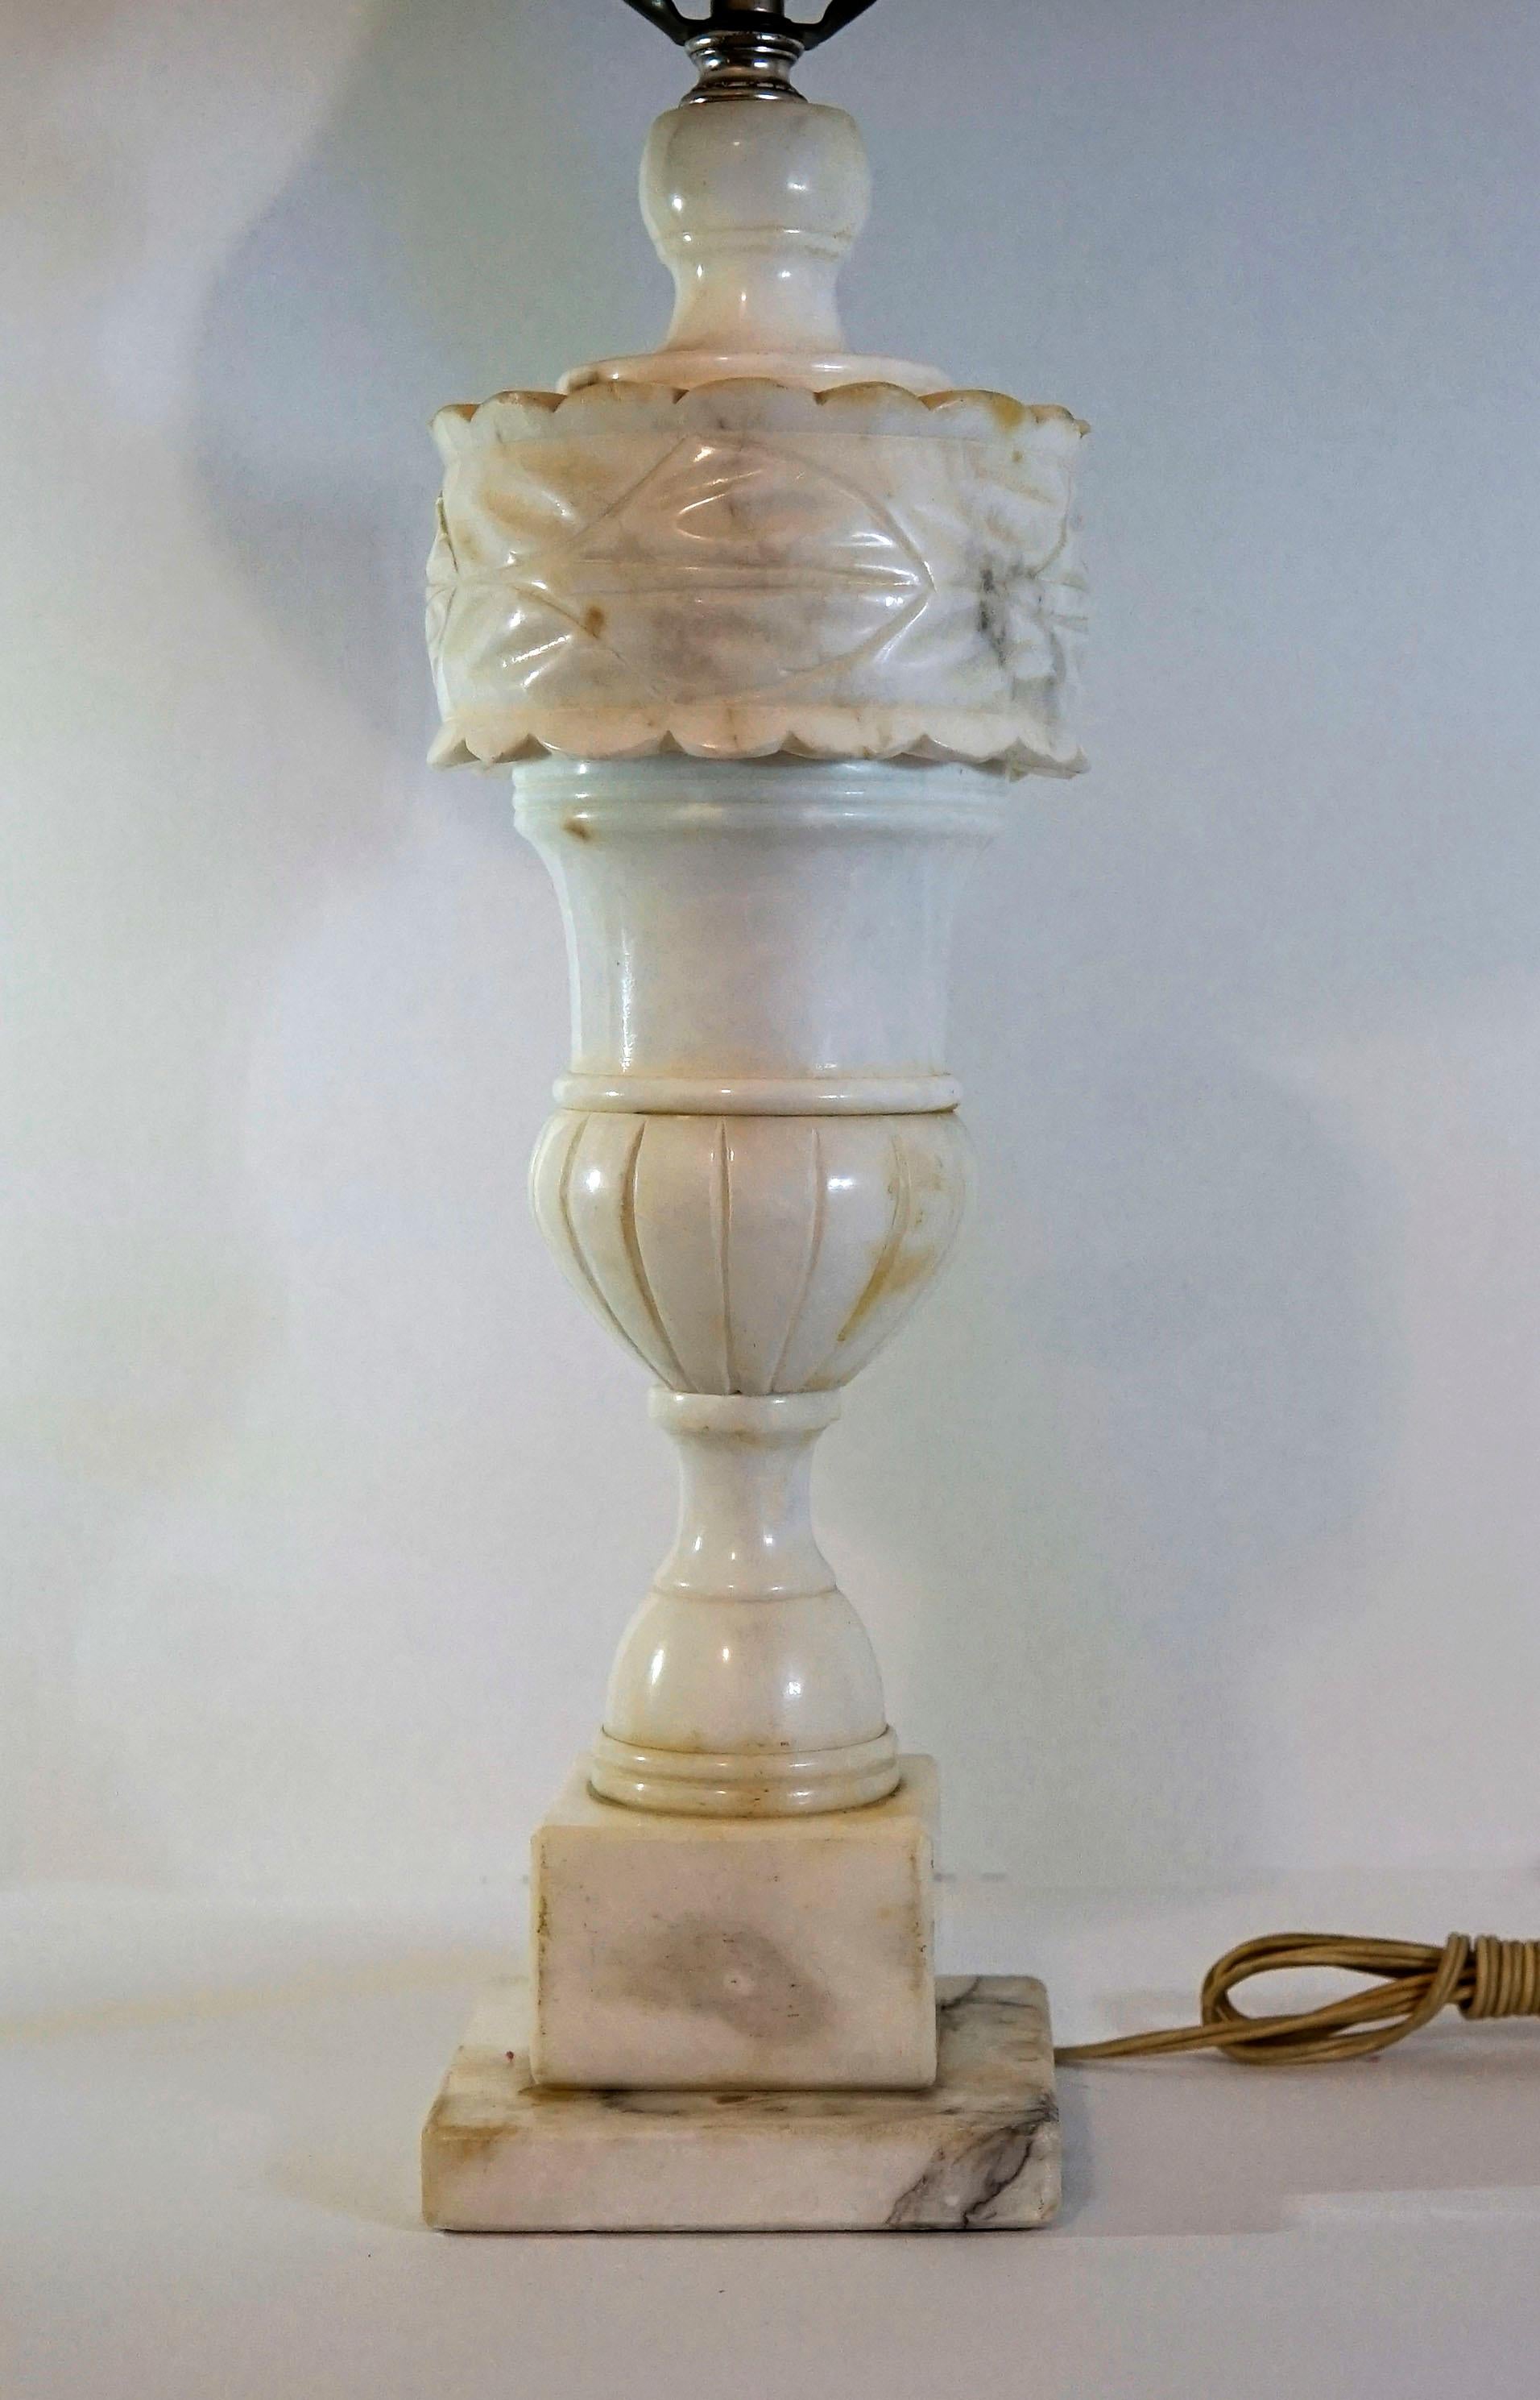 This alabaster lamp is stunning, with its irregular veining and exquisite carving. It is antique Regency style hand carved alabaster from the late 19th Century.
The baluster form is surmounted by a carved drum-form cuff over an urn-form body. The